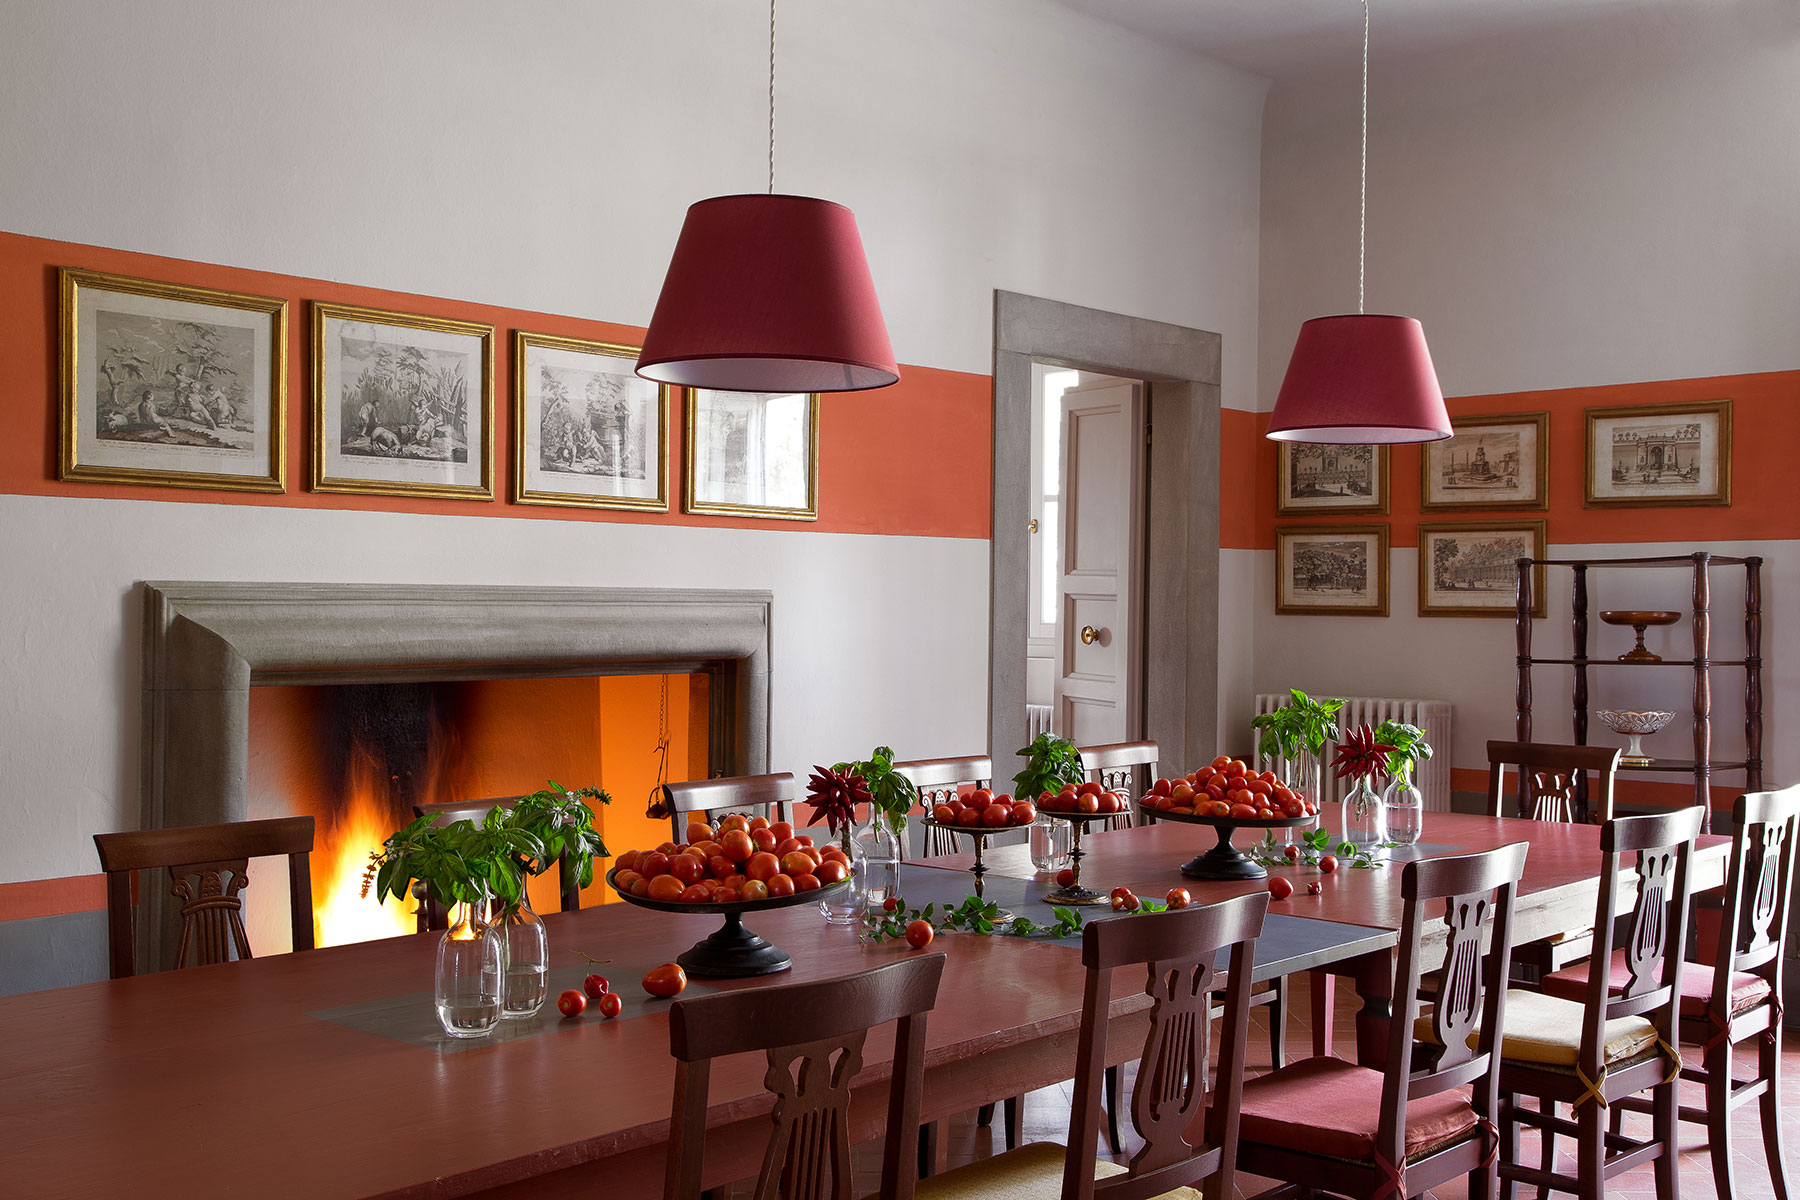 Make Your Dinnertime 10 Times Better with These Dining Room Chandeliers 4